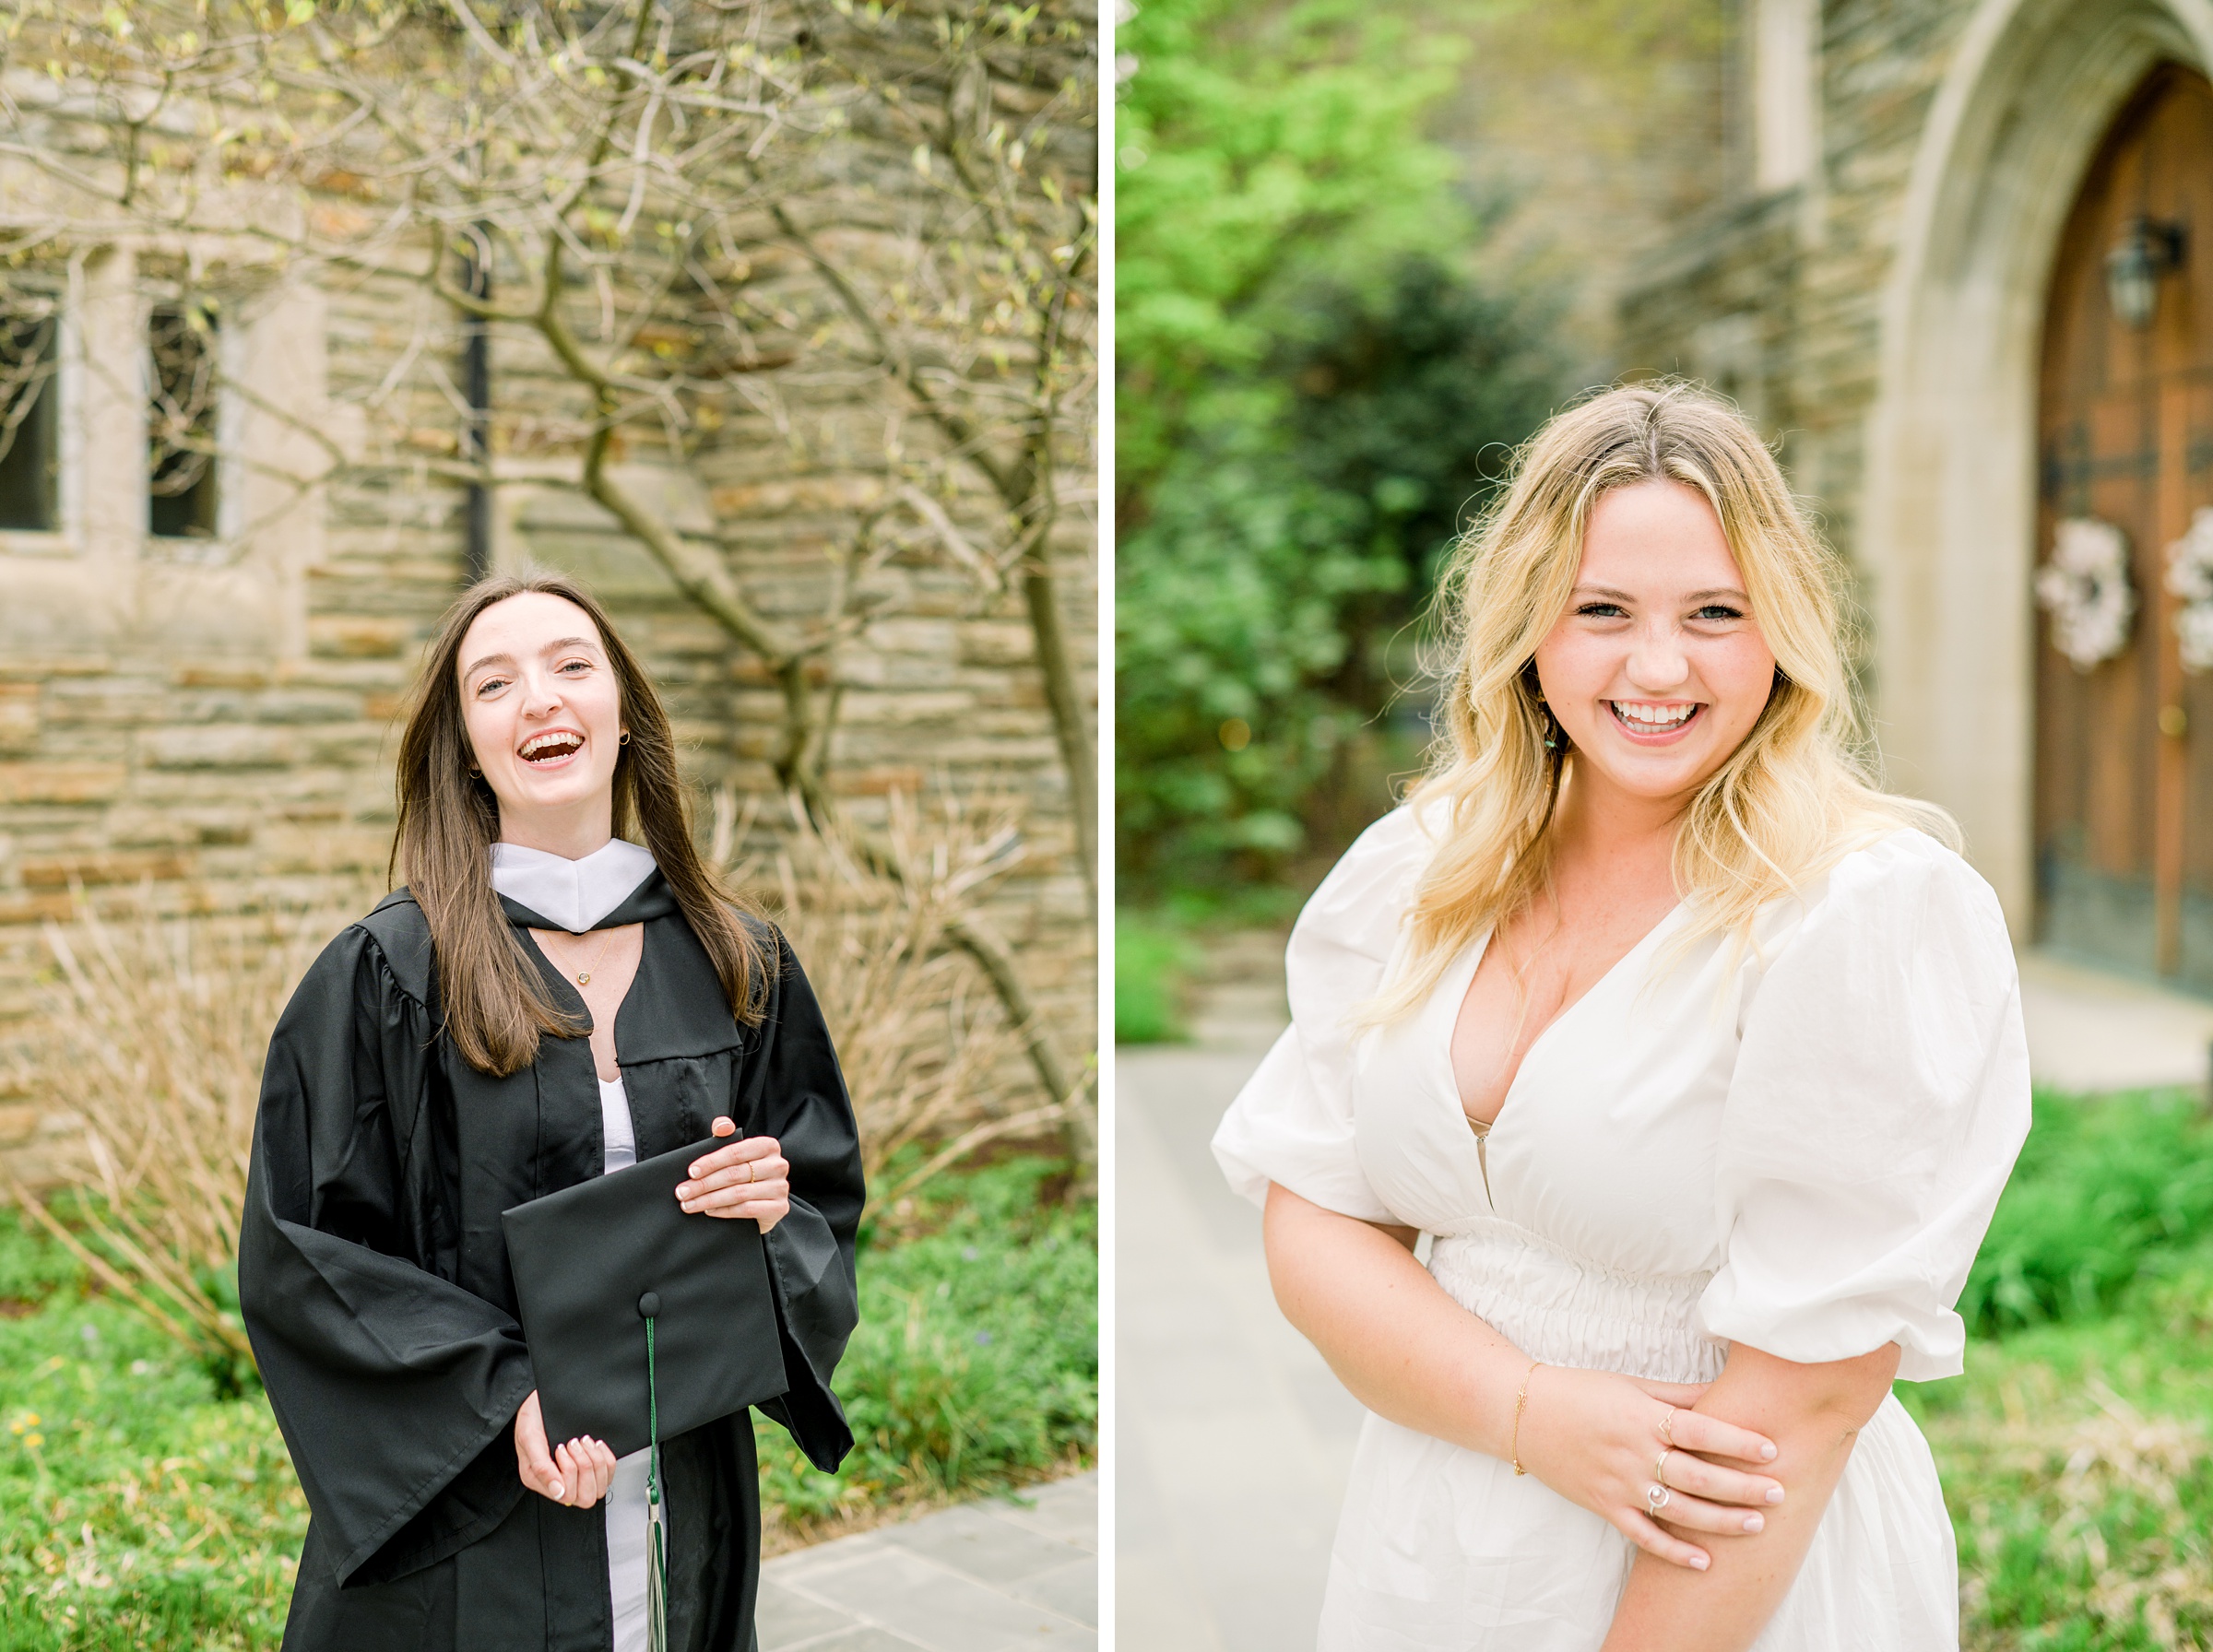 College Graduation Senior Session at Loyola University in Baltimore, Maryland. Photographed by Senior Portrait Photographer Cait Kramer Photography